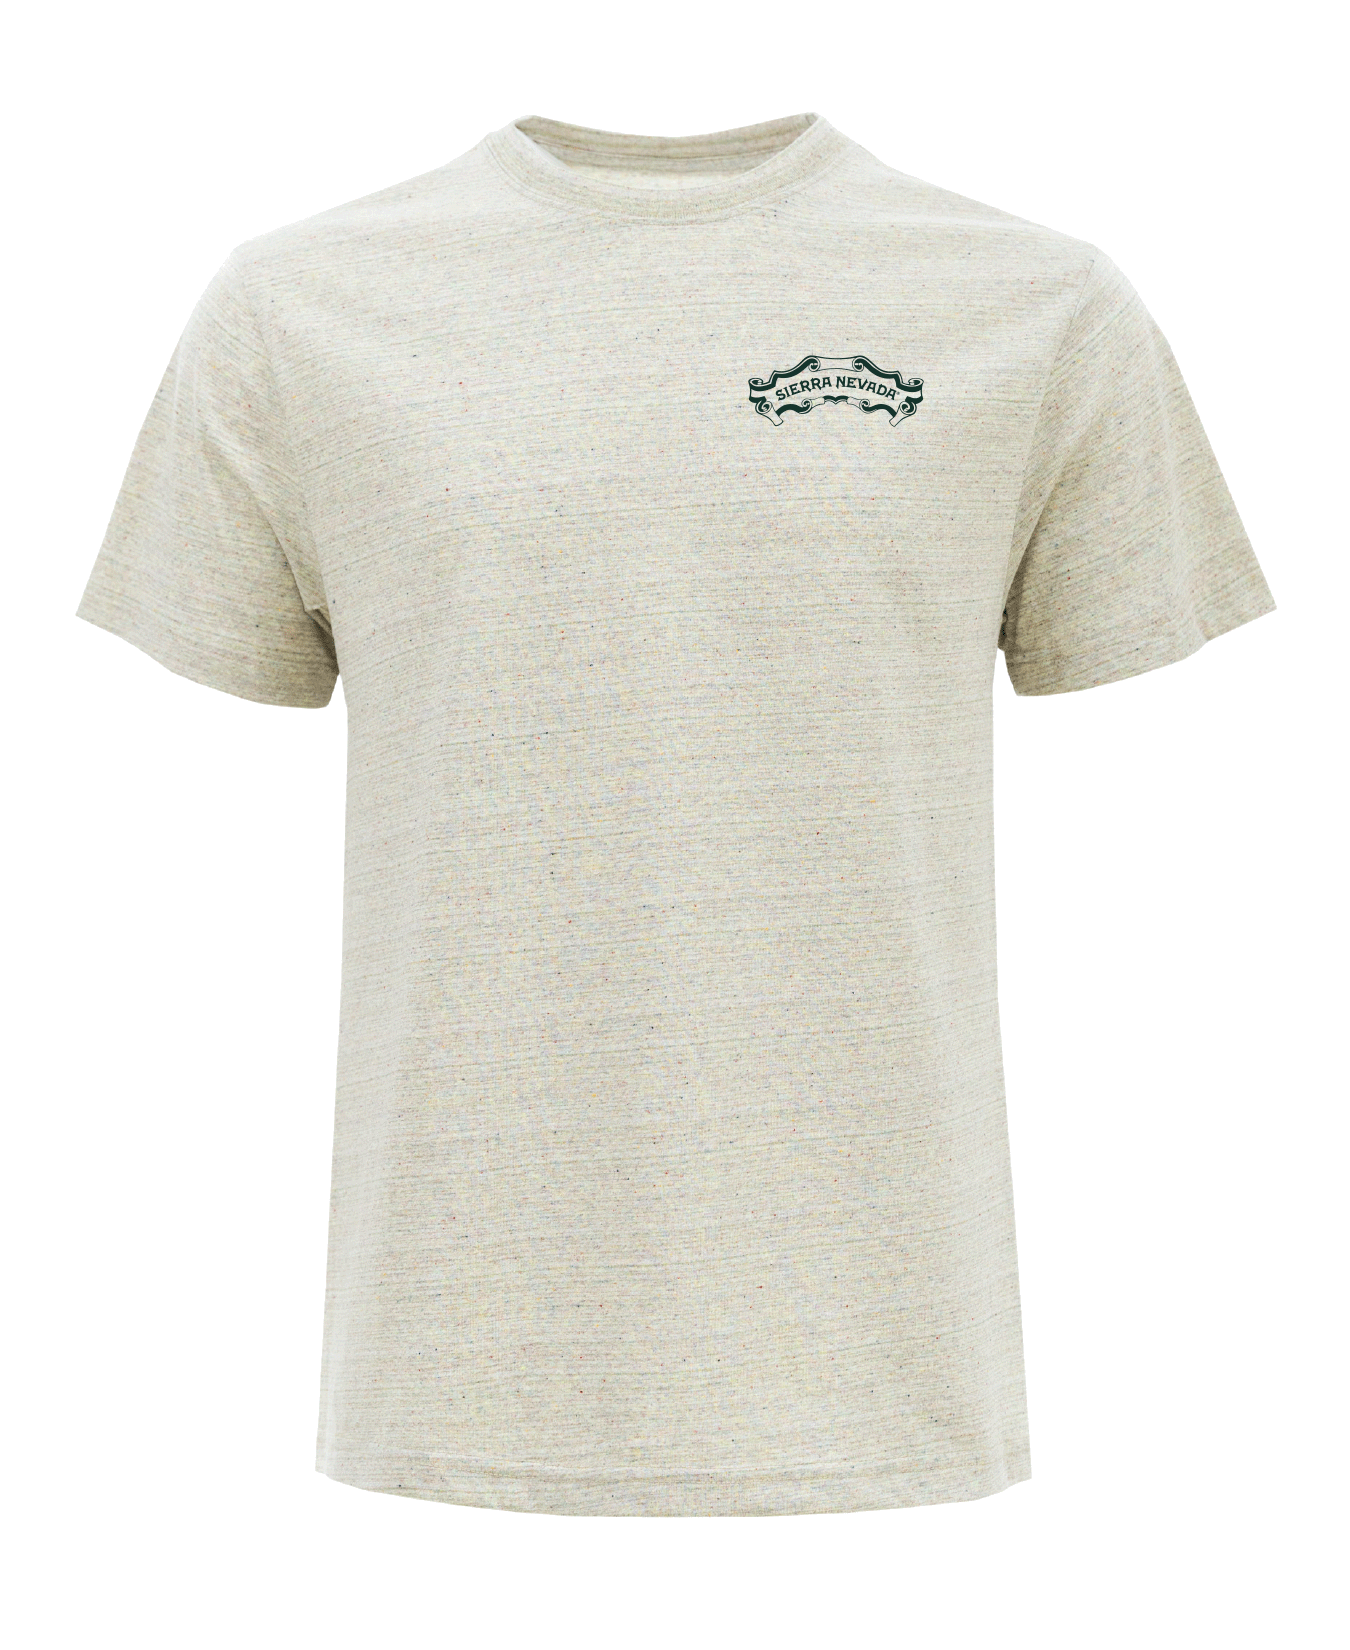 Sierra Nevada Recover Recycled Pines T-Shirt - Front view